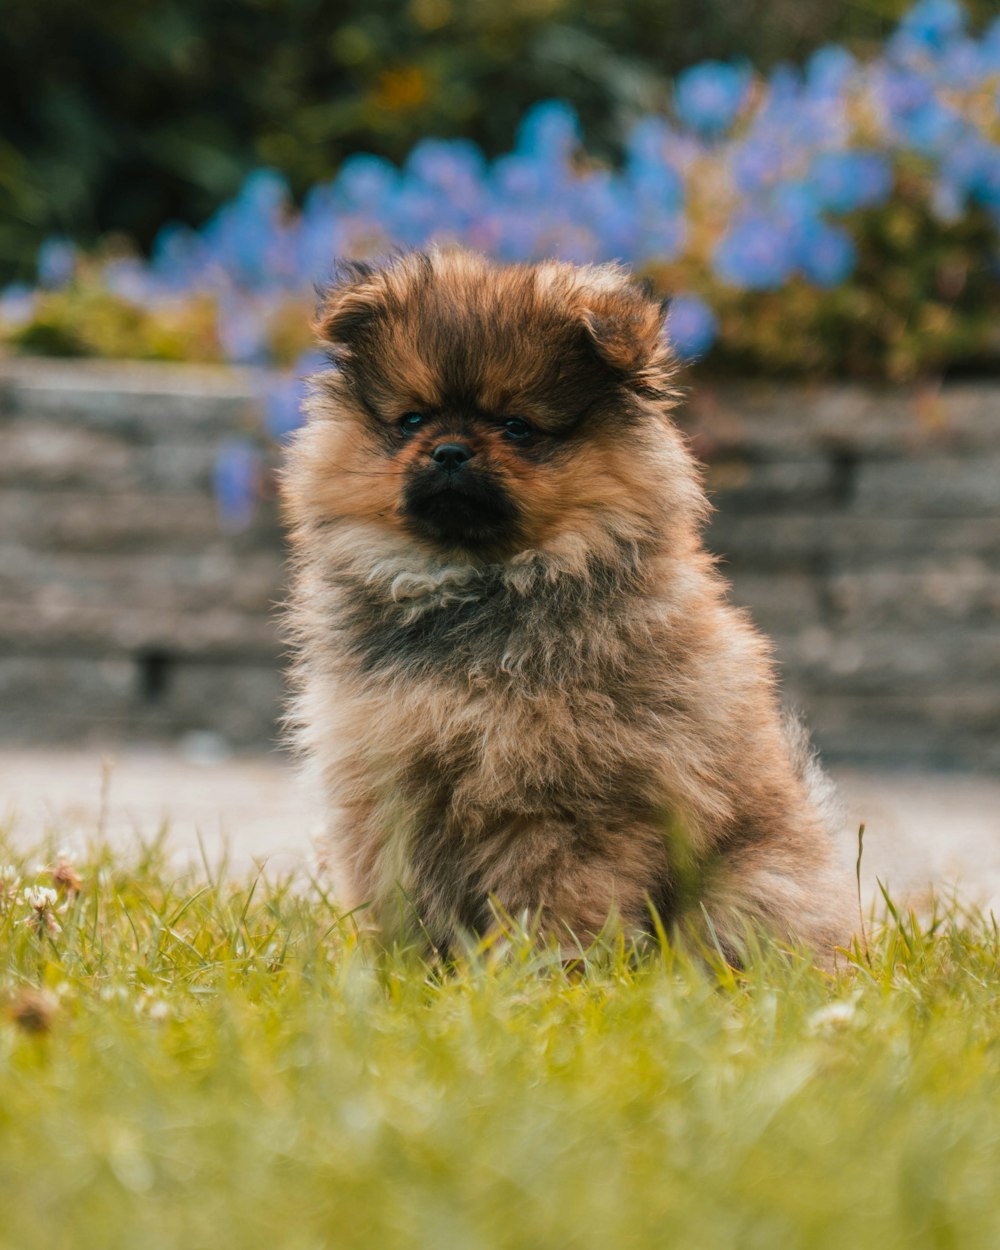 a small dog standing in grass